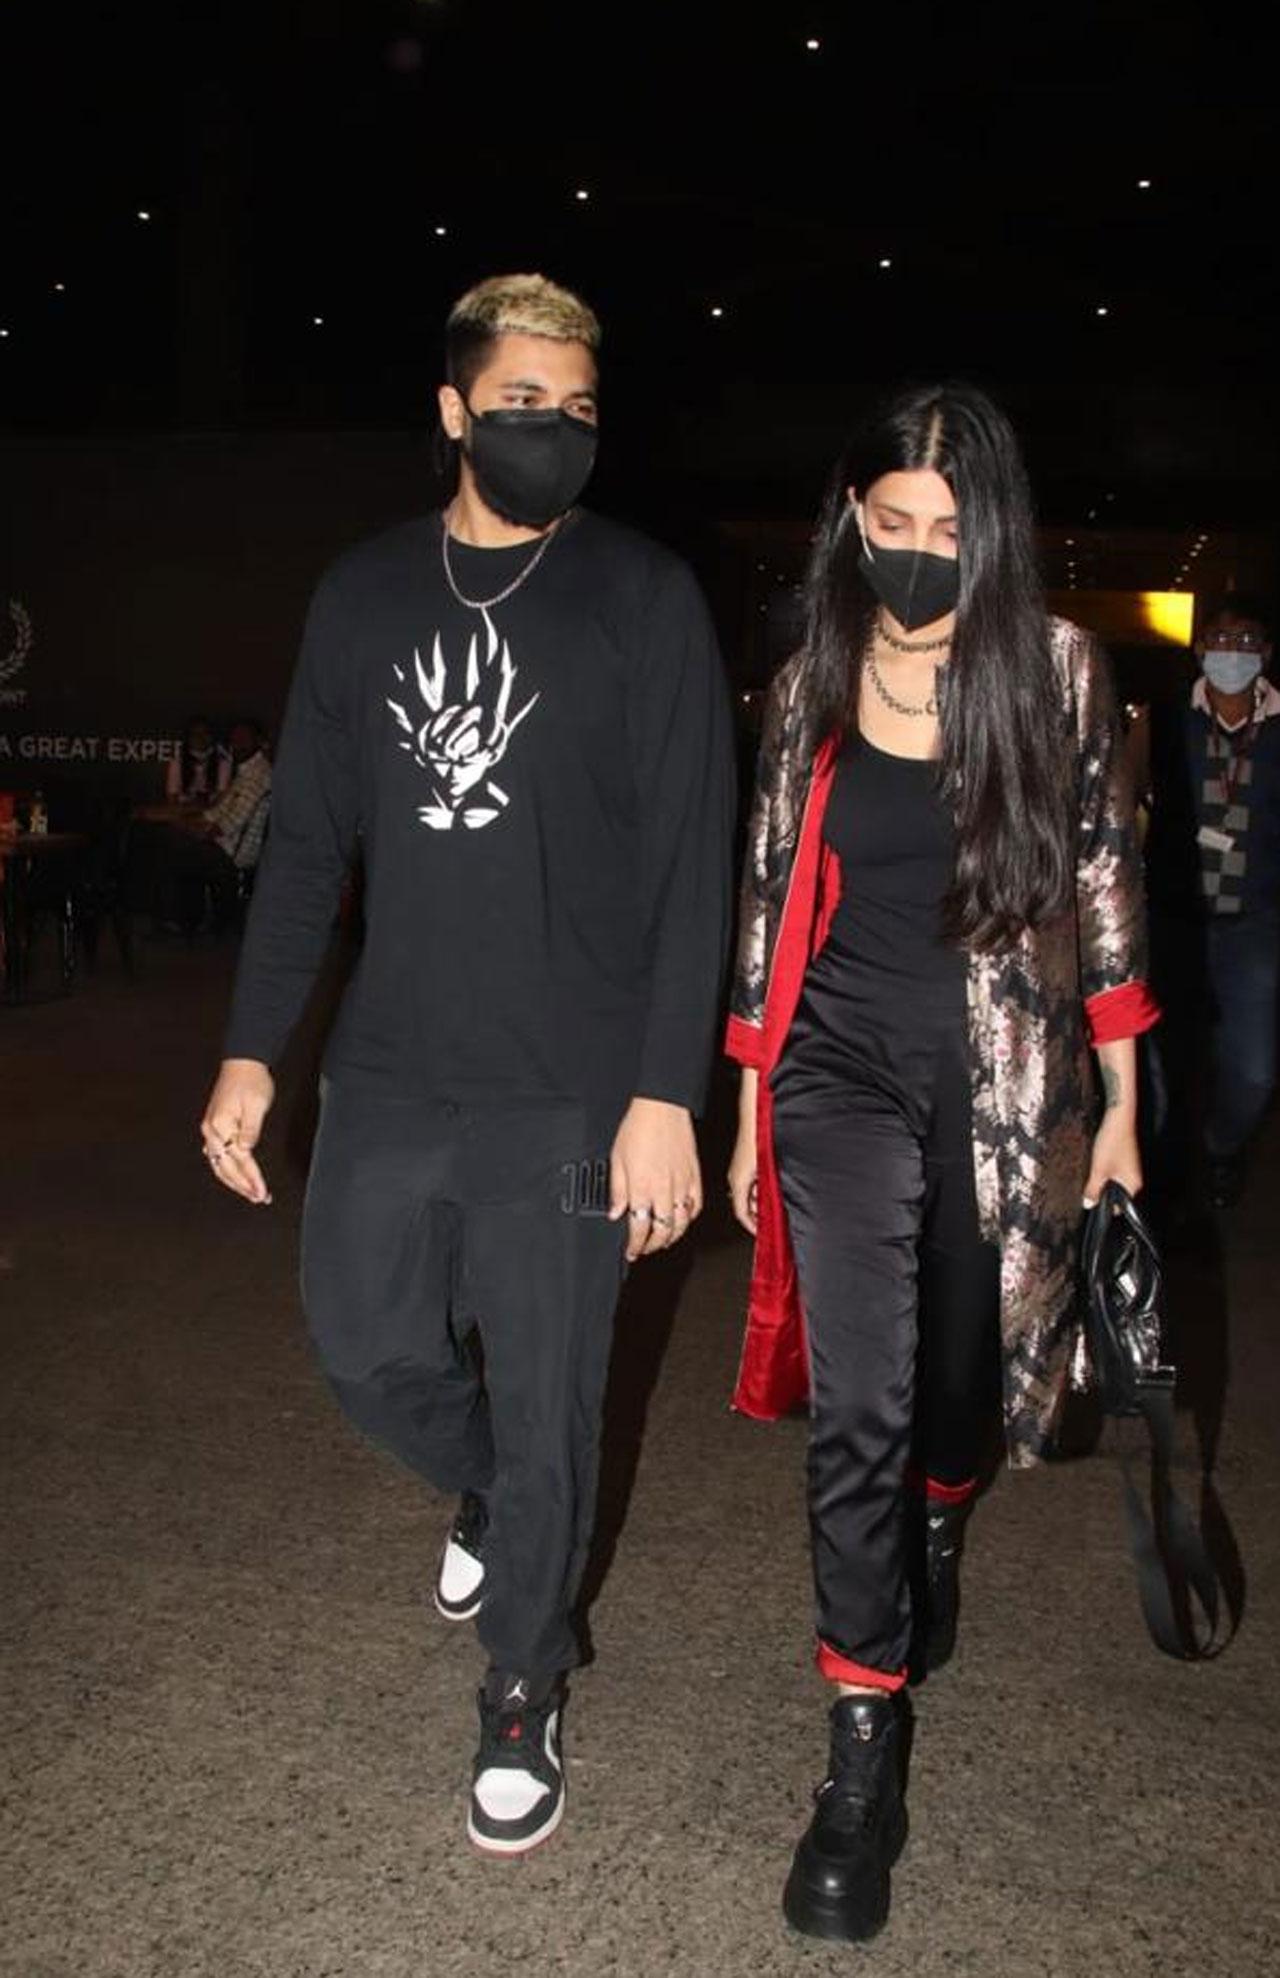 Earlier this year in March, Santanu Hazarika flew into Chennai to spend time with her. The actor posted loved-up snapshots wearing matching masks and wrote, “Chilling scenes.” She also posted that she was catching up with father Kamal Haasan after long.